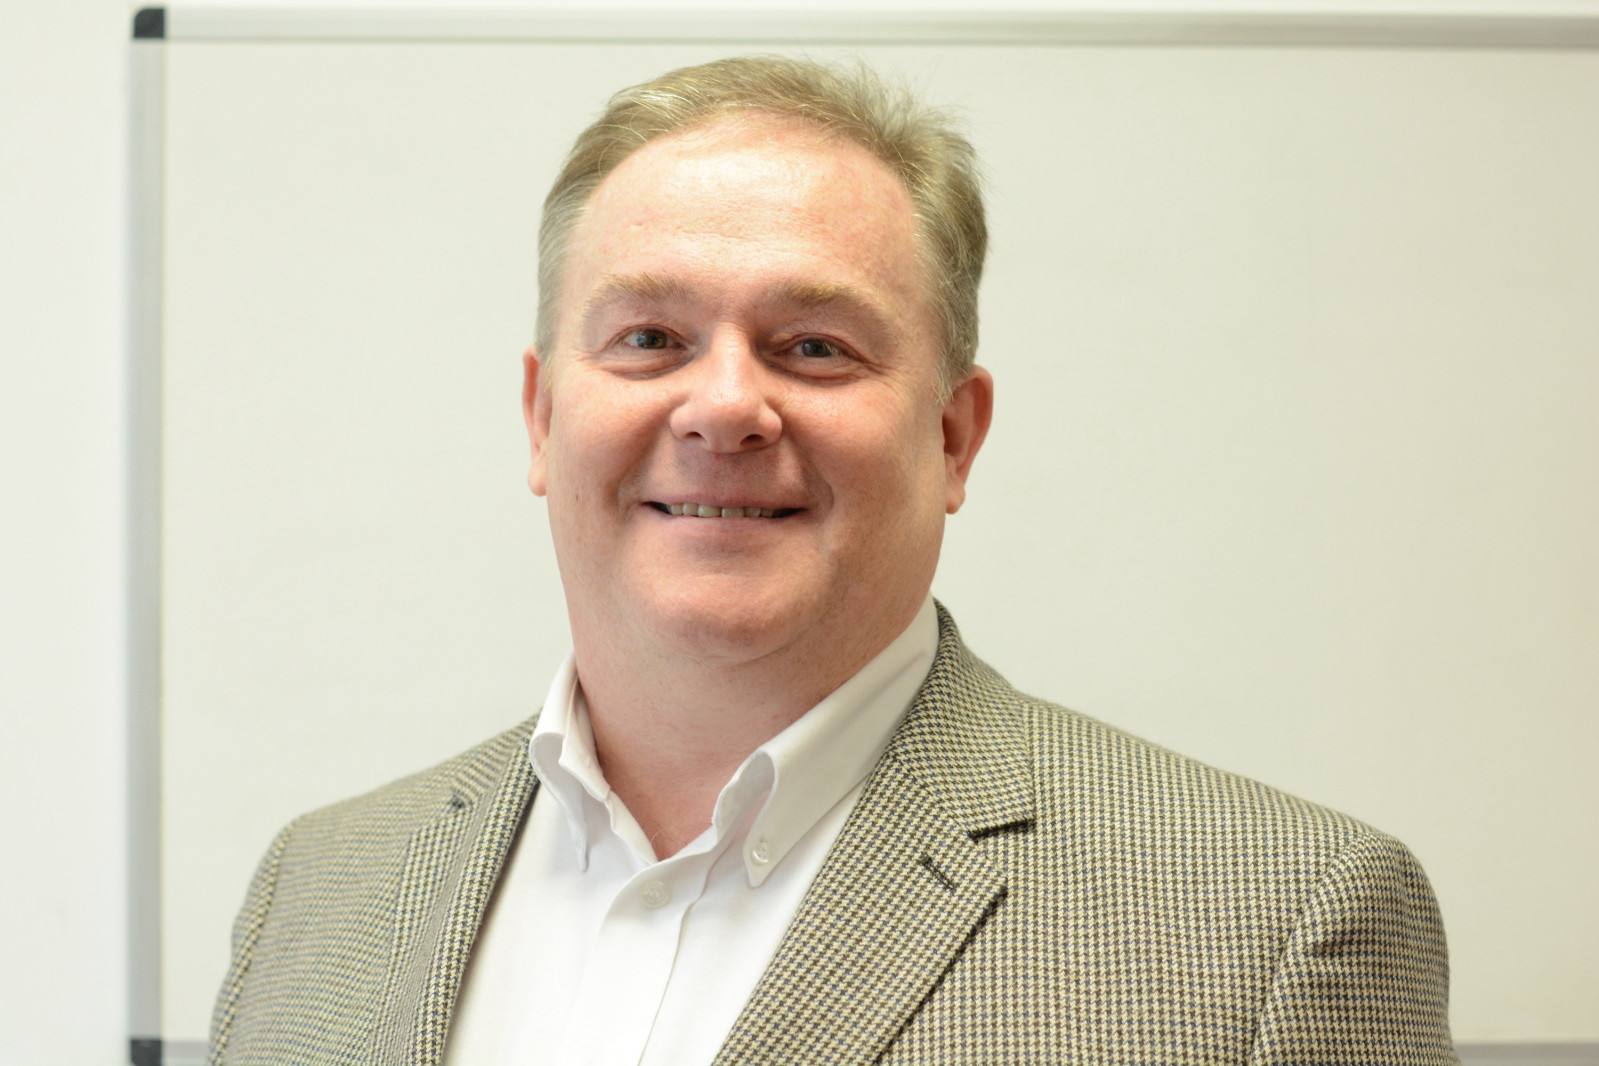 Unison’s Steve Haddrell becomes Sales Director of Nukon Lasers UK